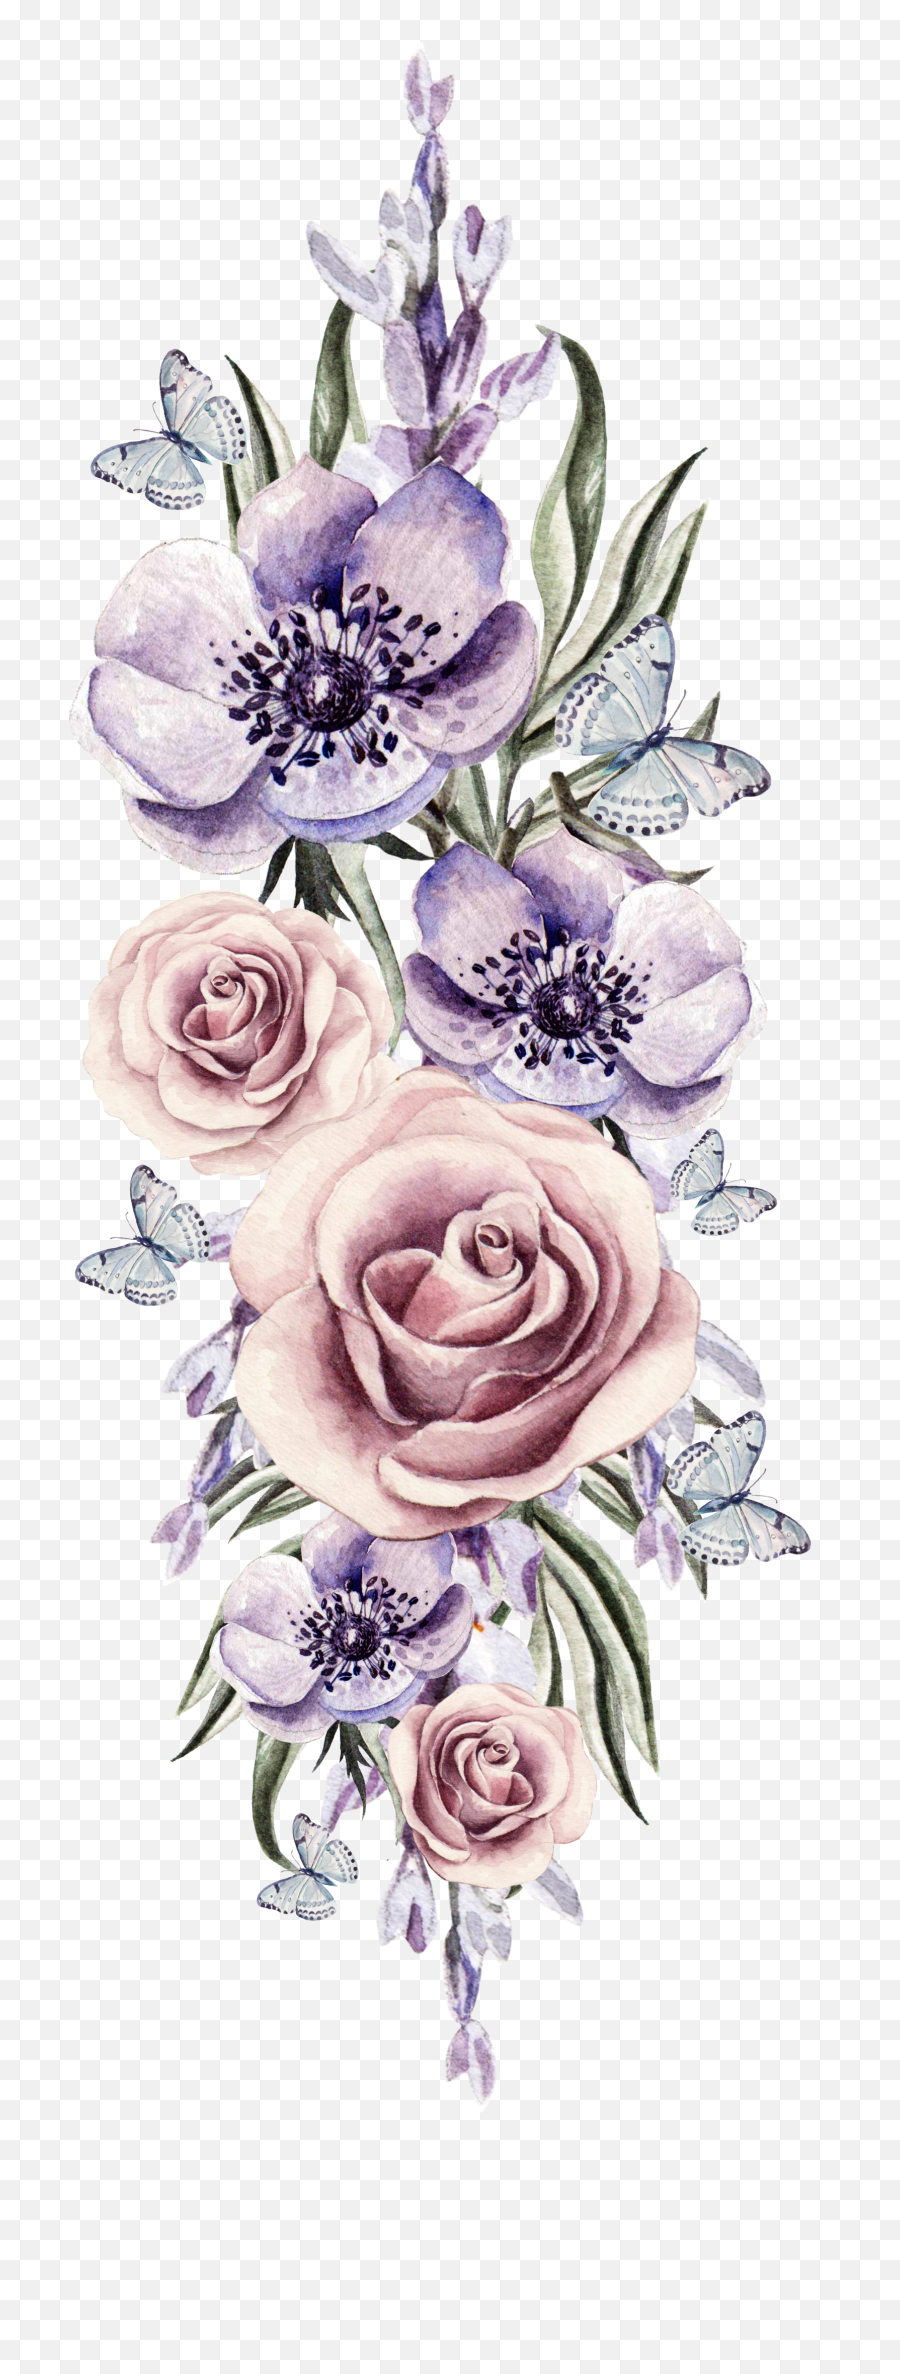 Flower Watercolor Png Pictures Free Download - Free Transparent Background Flowers Png,Roses Transparent Background